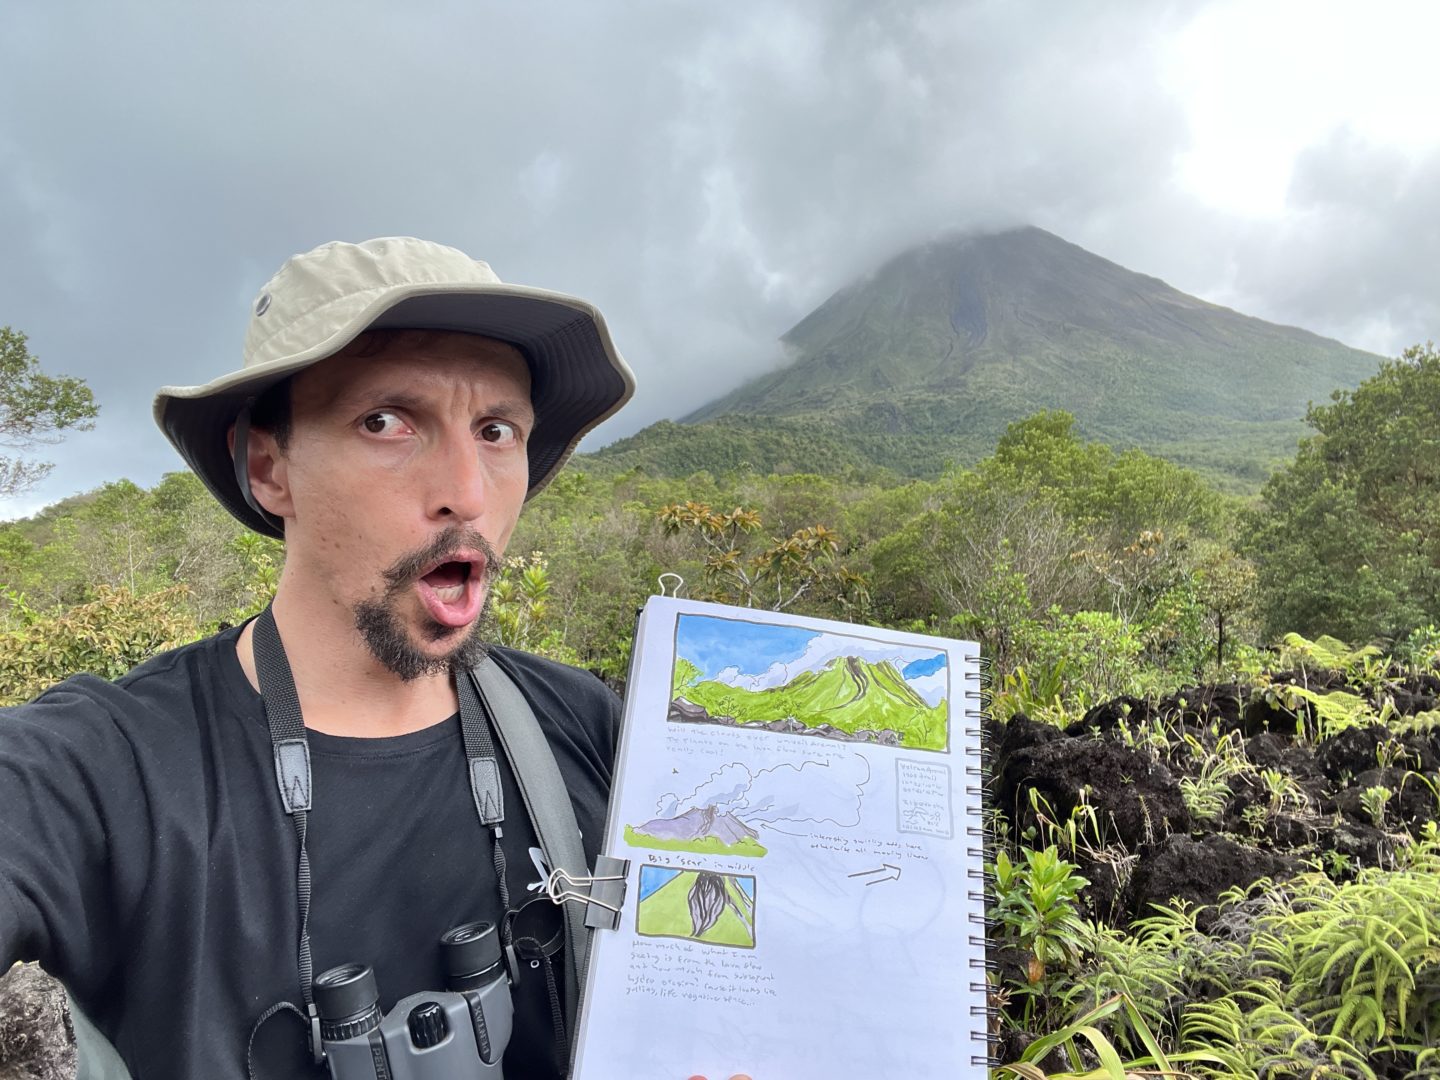 marley peifer nature journaling in costa rica at the arenal volcano showing his nature journal with watercolor sketches of the volcano in the background